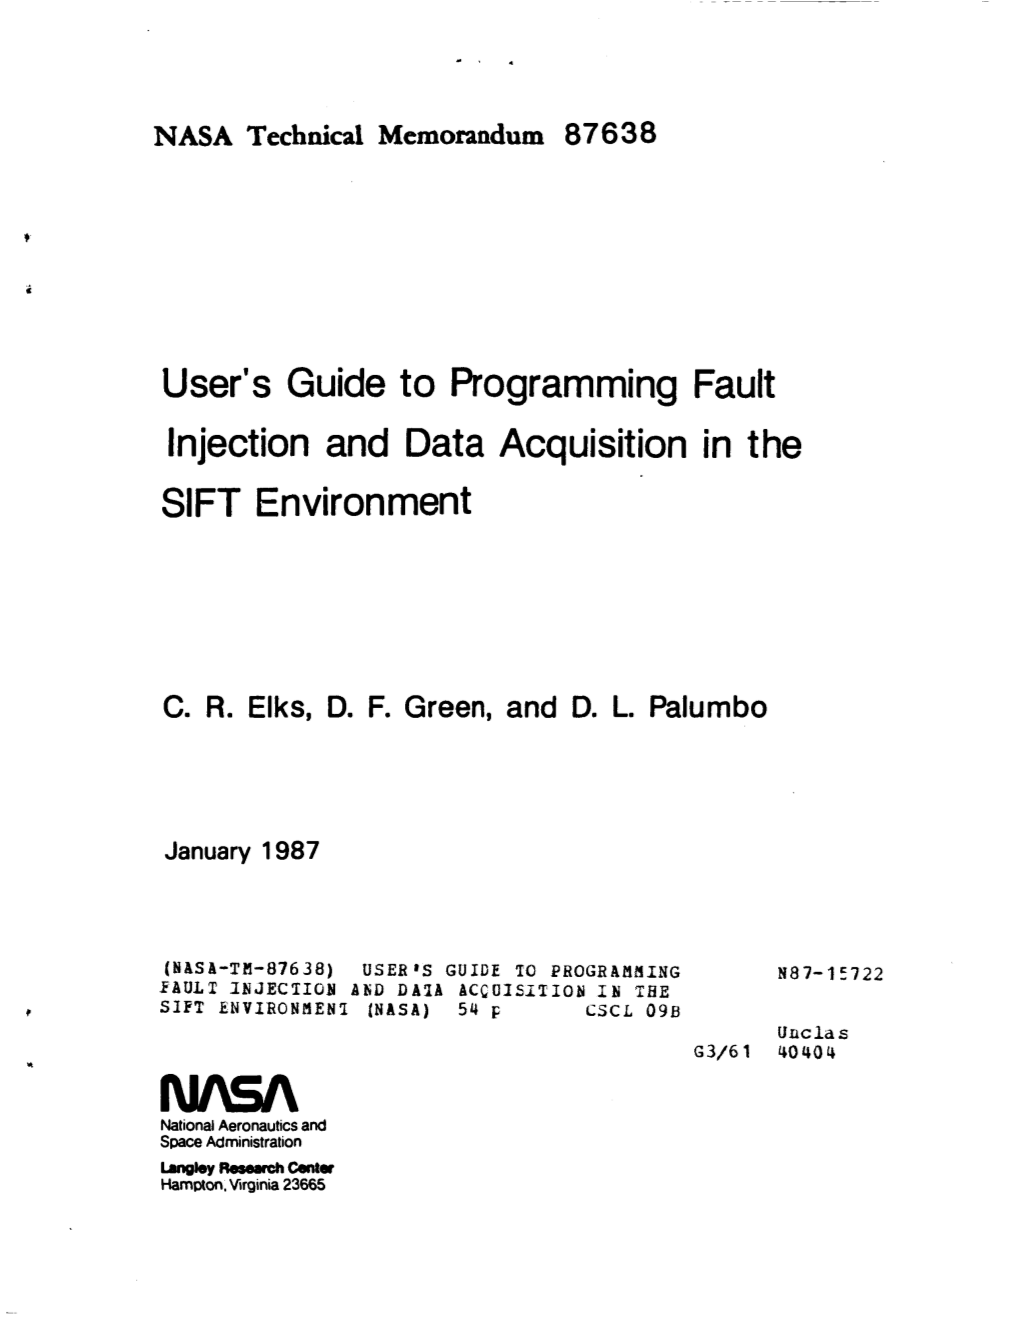 User's Guide to Programming Fault Injection and Data Acquisition in the SIFT Environment